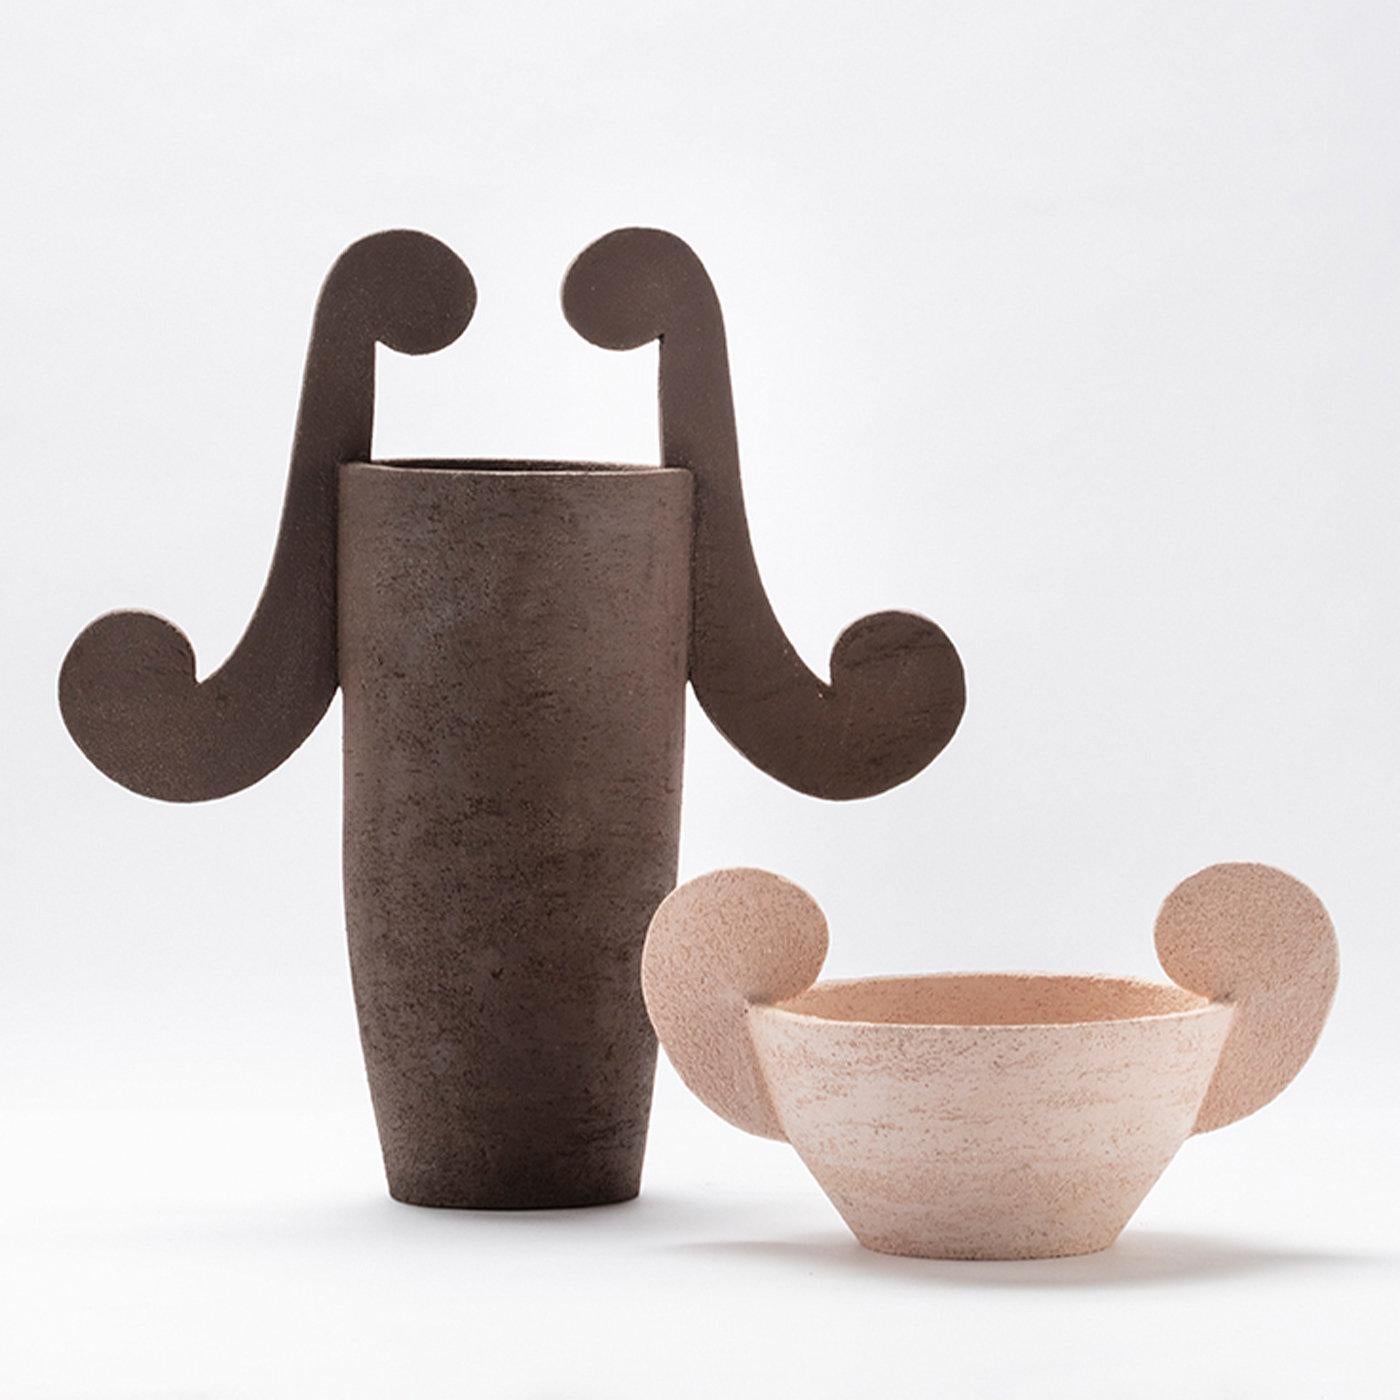 This exclusive vase massive is crafted by hand of demi-refractory terracotta and finished on a lathe. The vase embodies Ceo, god of the Intelligence, with its oxide brown hue. Decorative curls seal the pieces, which are fired at 1020°C.